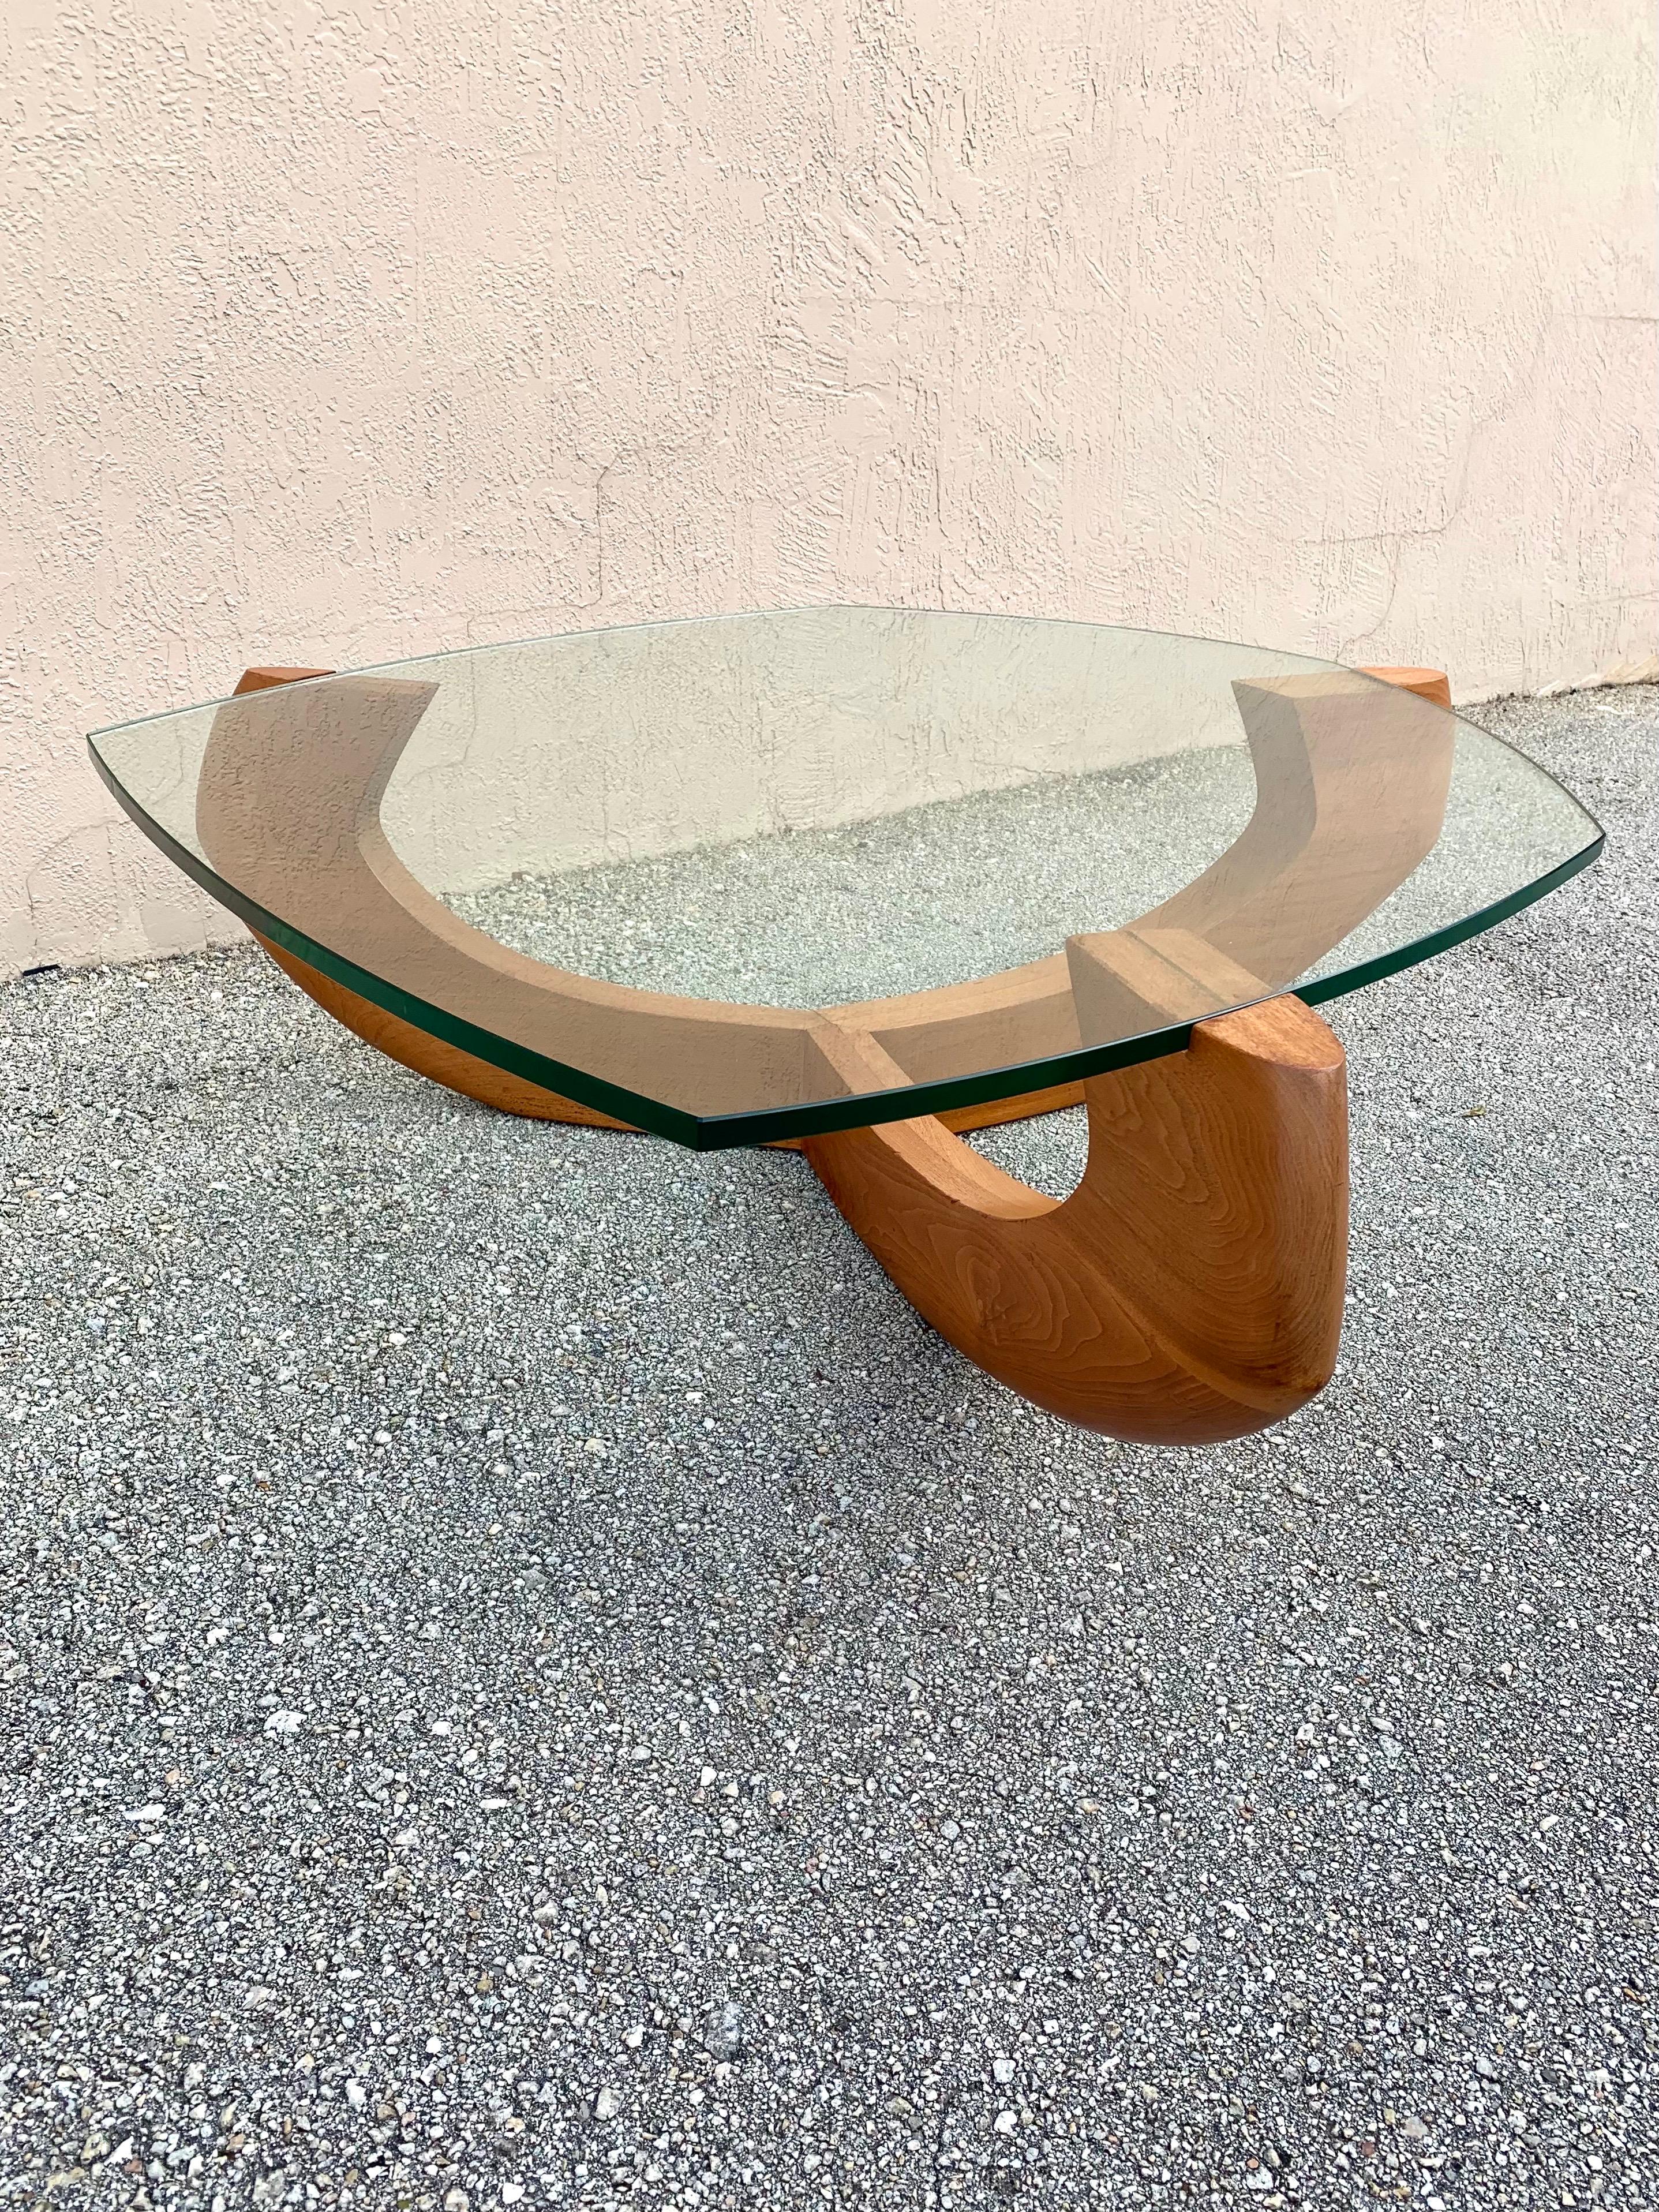 Mid Century Modern walnut glass top coffee table. Three solid arms coming from a tapered center holding up the glass top. Each arm has a brass stripe accenting under the glass top. Each different angle creates its own unique and interesting view.